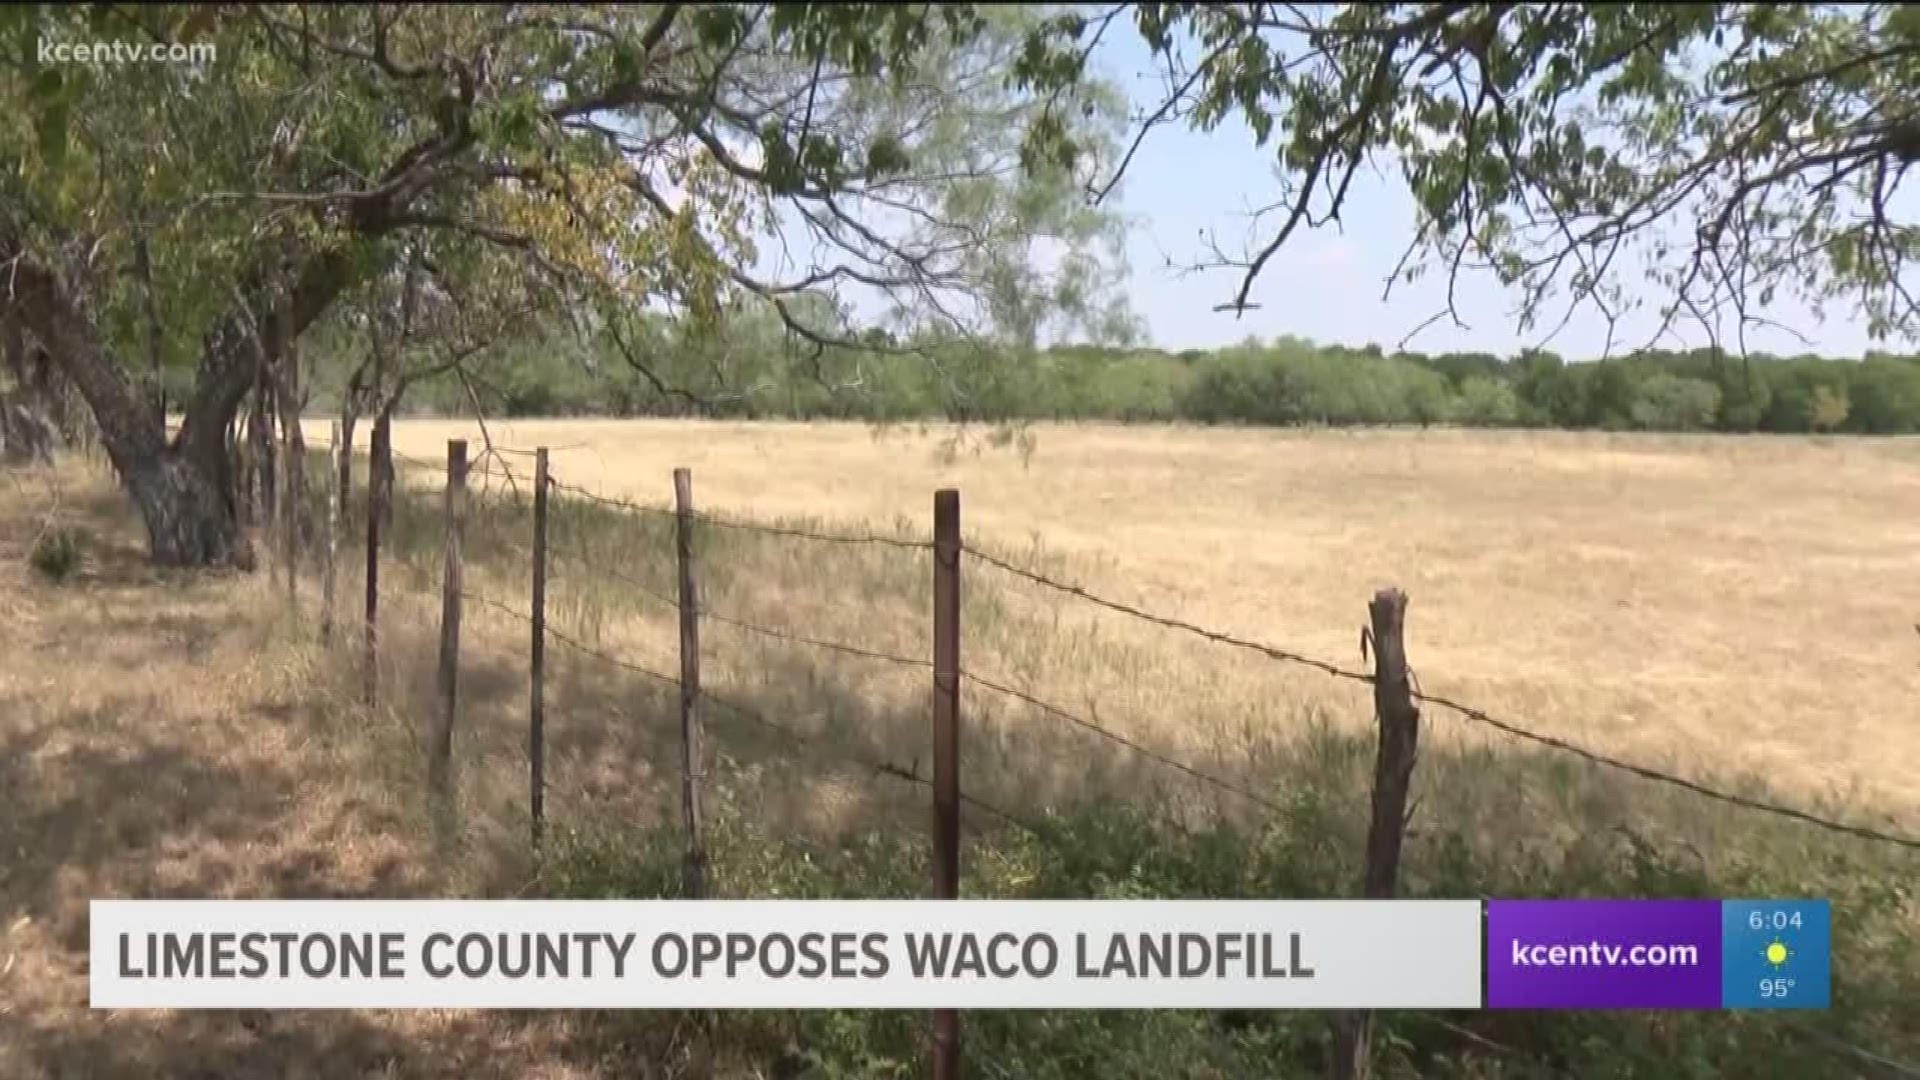 Limestone county commissioners vote on resolution to oppose Waco landfill